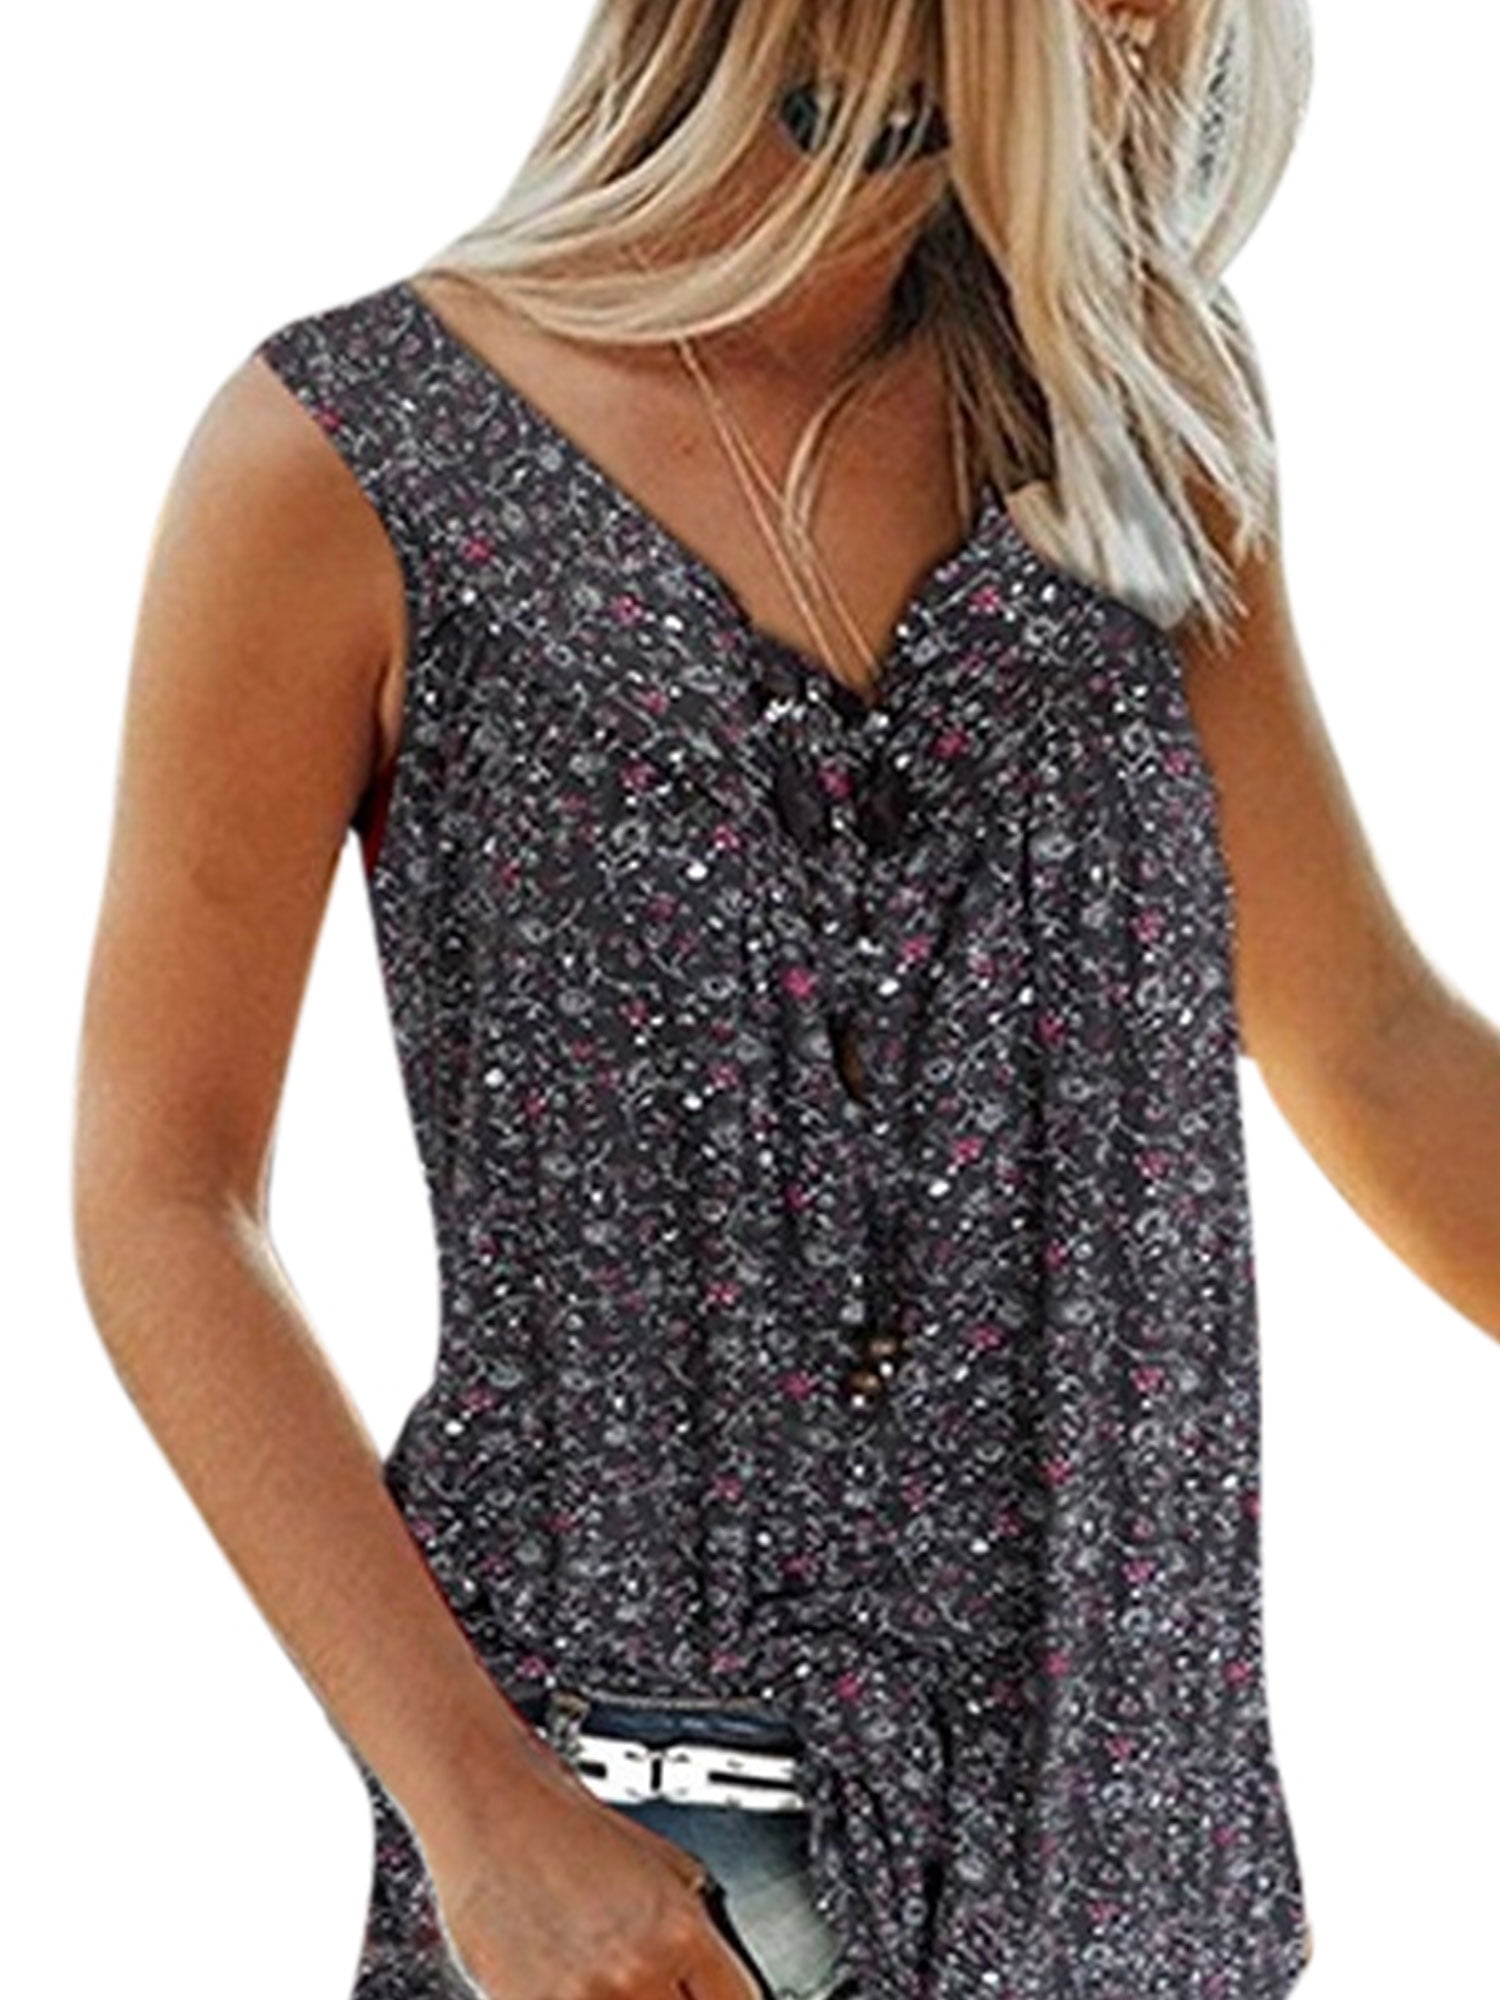 Spmor Womens V Neck Camisole Leaf Print Tanks Tops and Blouse Casual Shirts